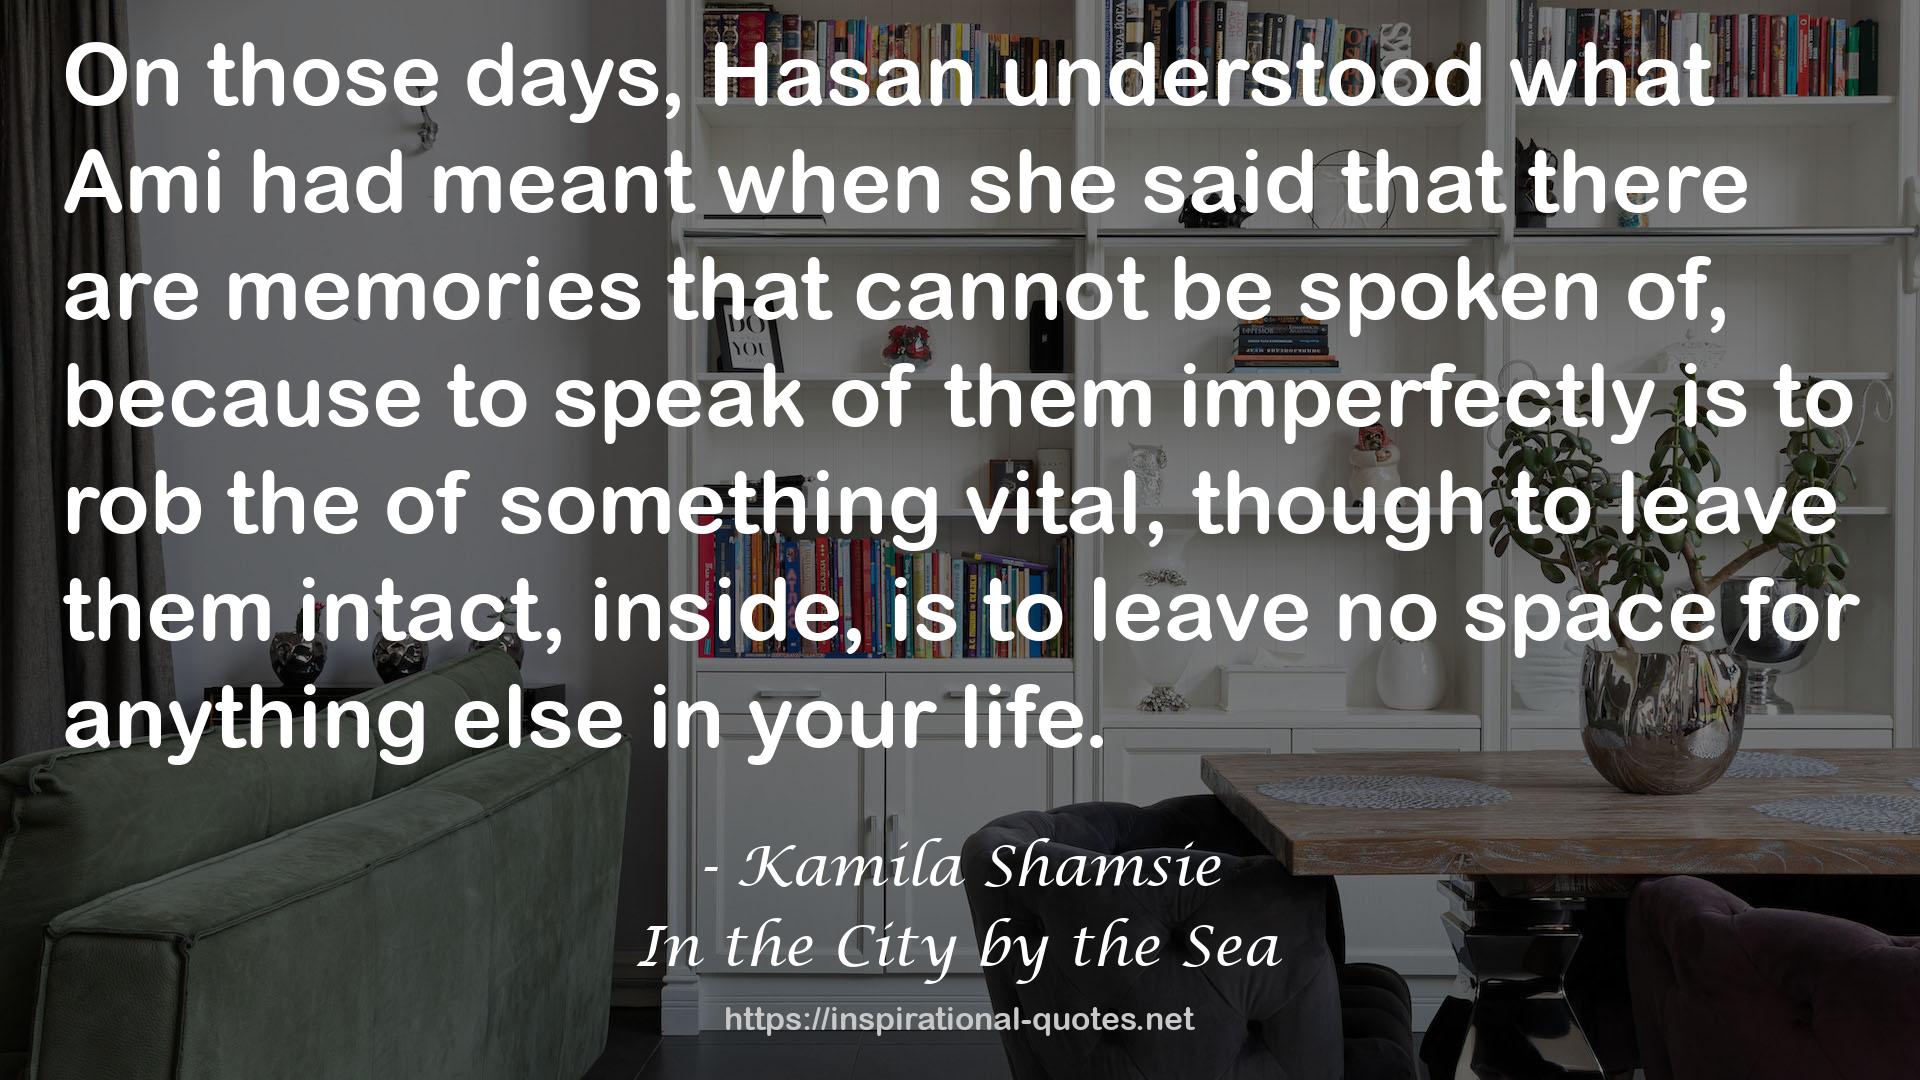 In the City by the Sea QUOTES